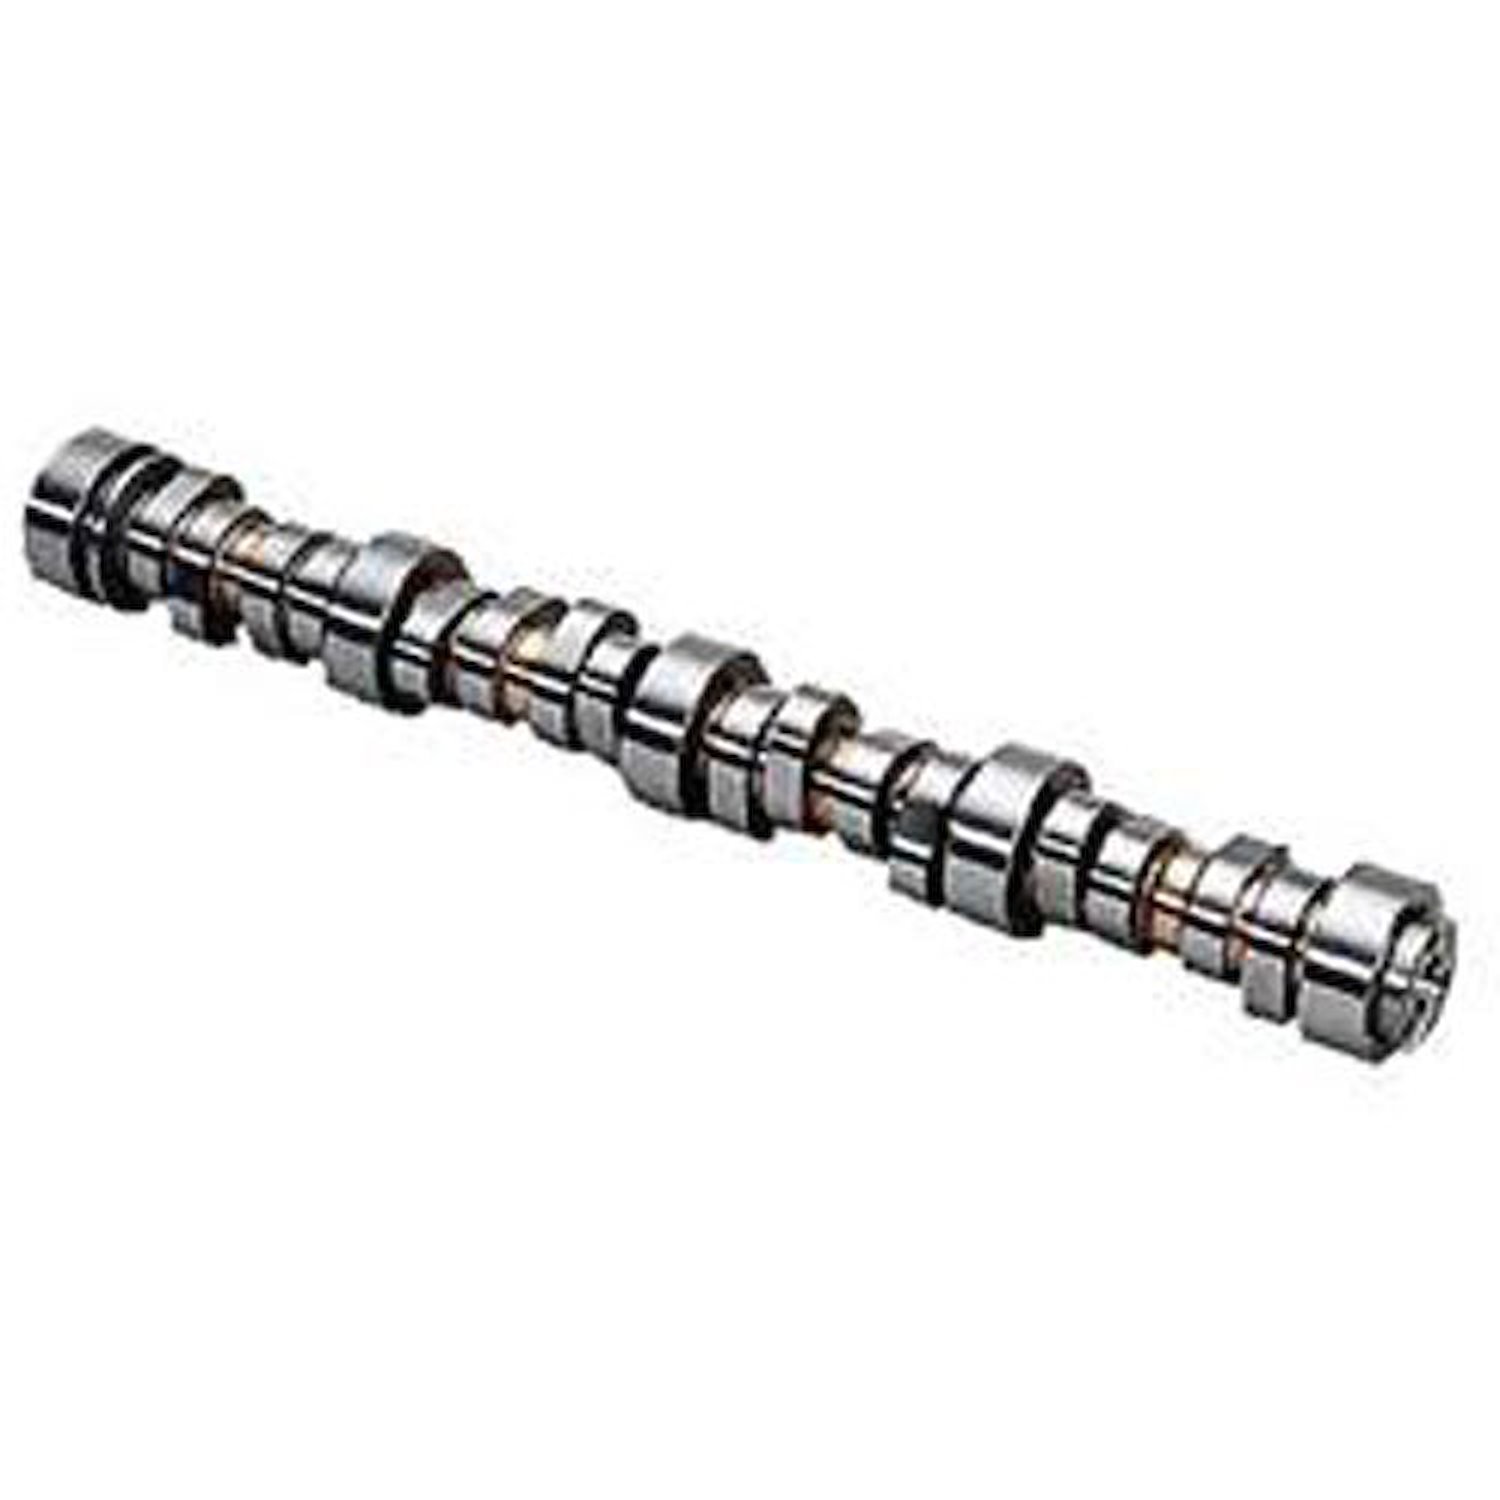 Stock Replacement Hydraulic Roller Camshaft for 2007-2014 5.3L with AFM/DOD (LS4/LC9/LH6)